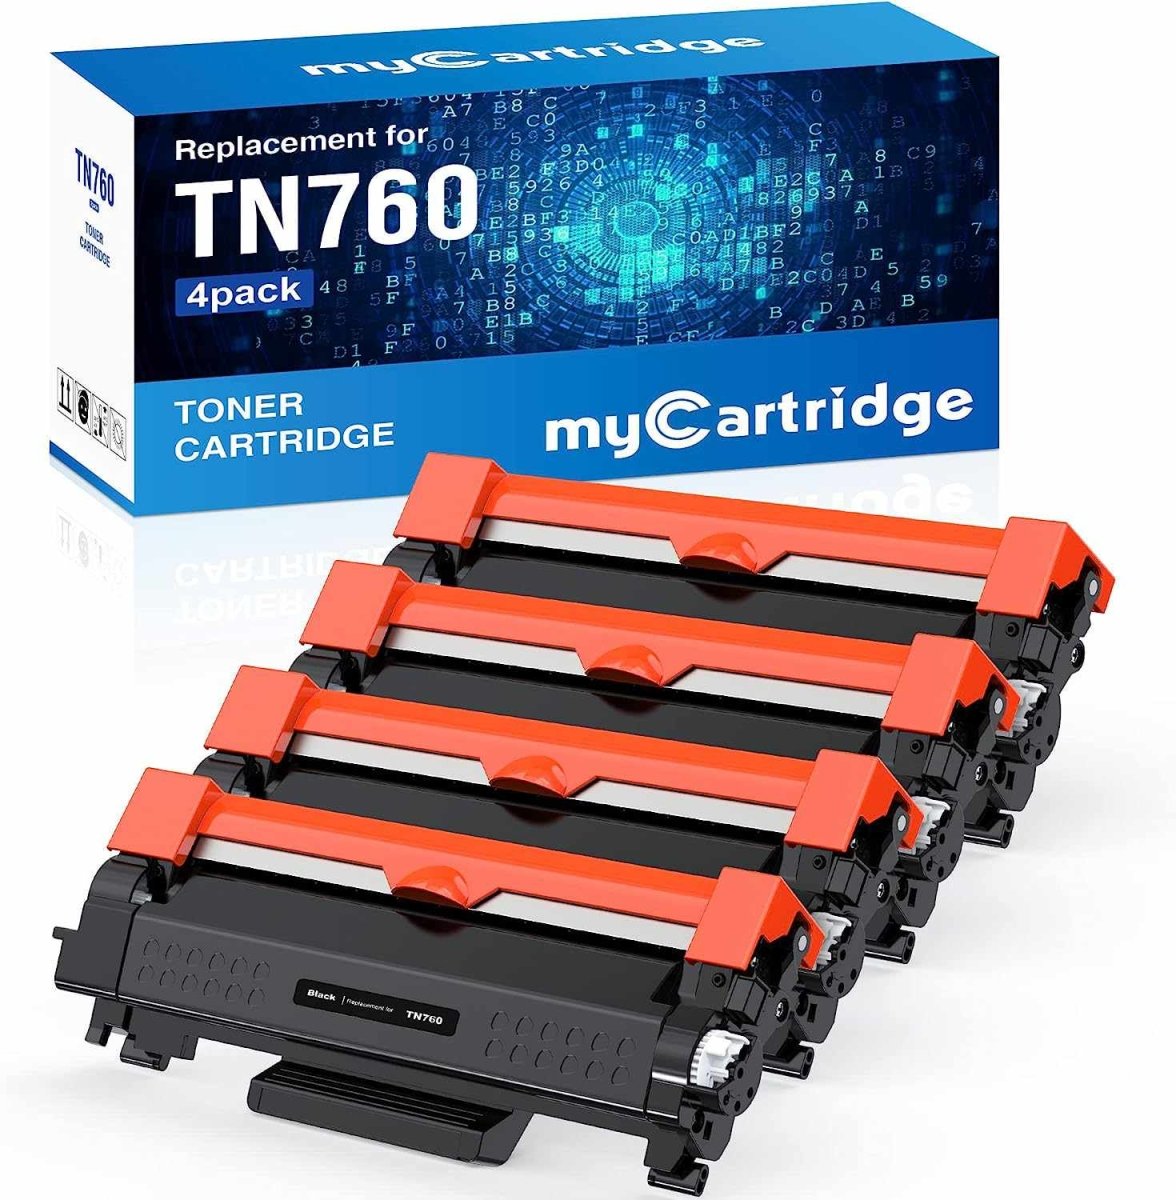 Ink and Toner Cartridges for Brother Printers, Free & Fast Shipping